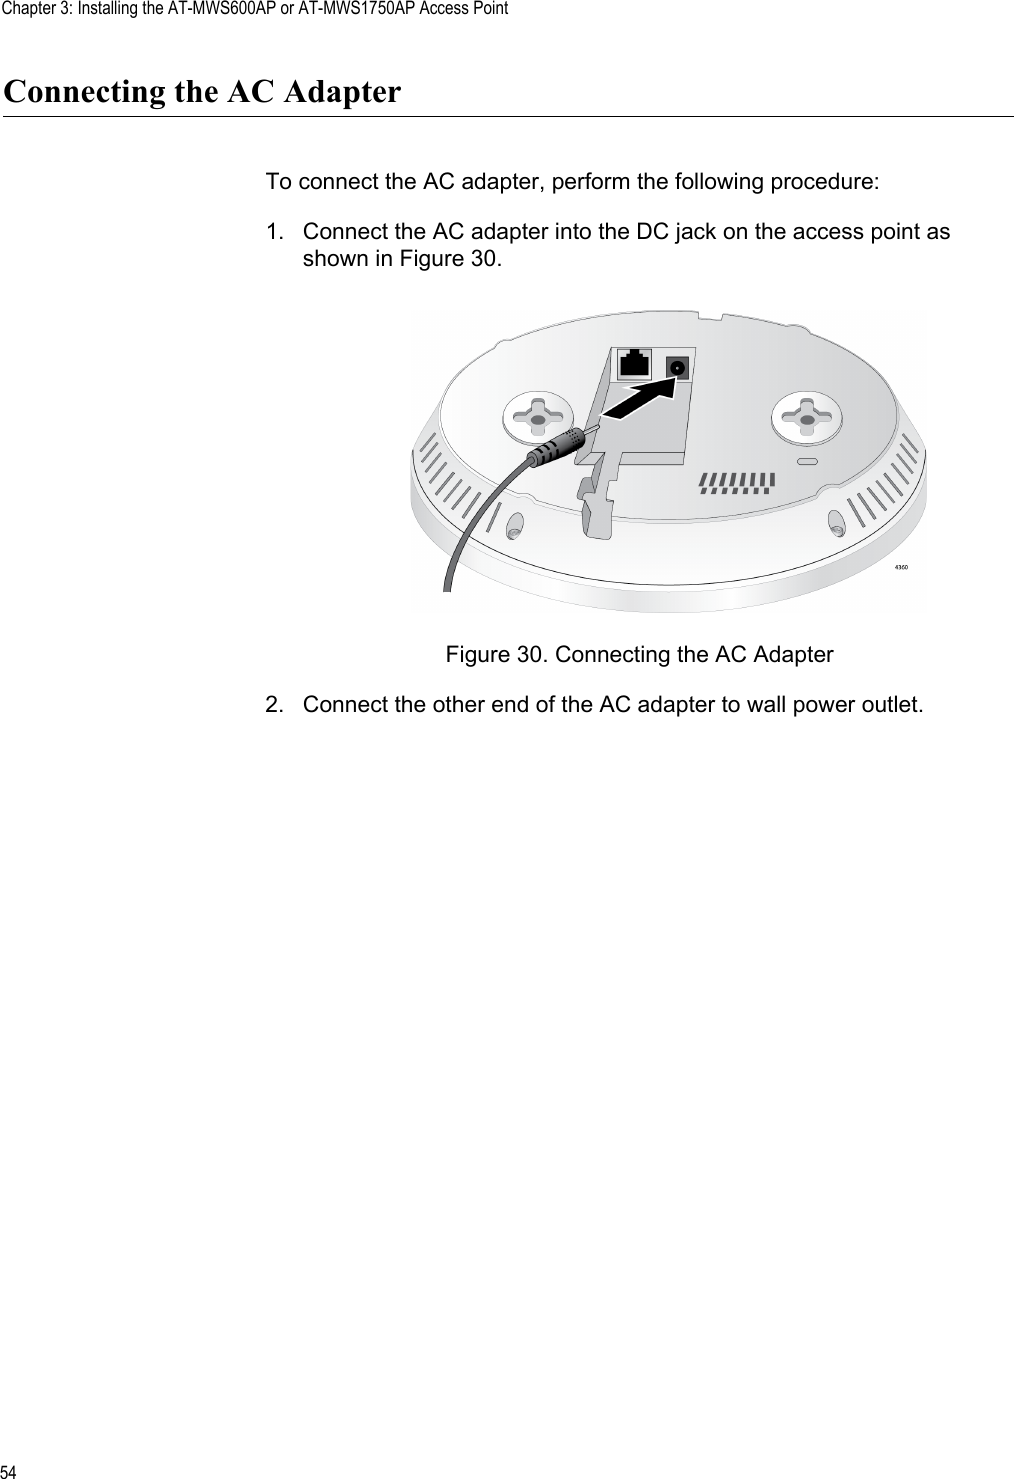 Chapter 3: Installing the AT-MWS600AP or AT-MWS1750AP Access Point54Connecting the AC AdapterTo connect the AC adapter, perform the following procedure:1. Connect the AC adapter into the DC jack on the access point as shown in Figure 30.Figure 30. Connecting the AC Adapter2. Connect the other end of the AC adapter to wall power outlet. 